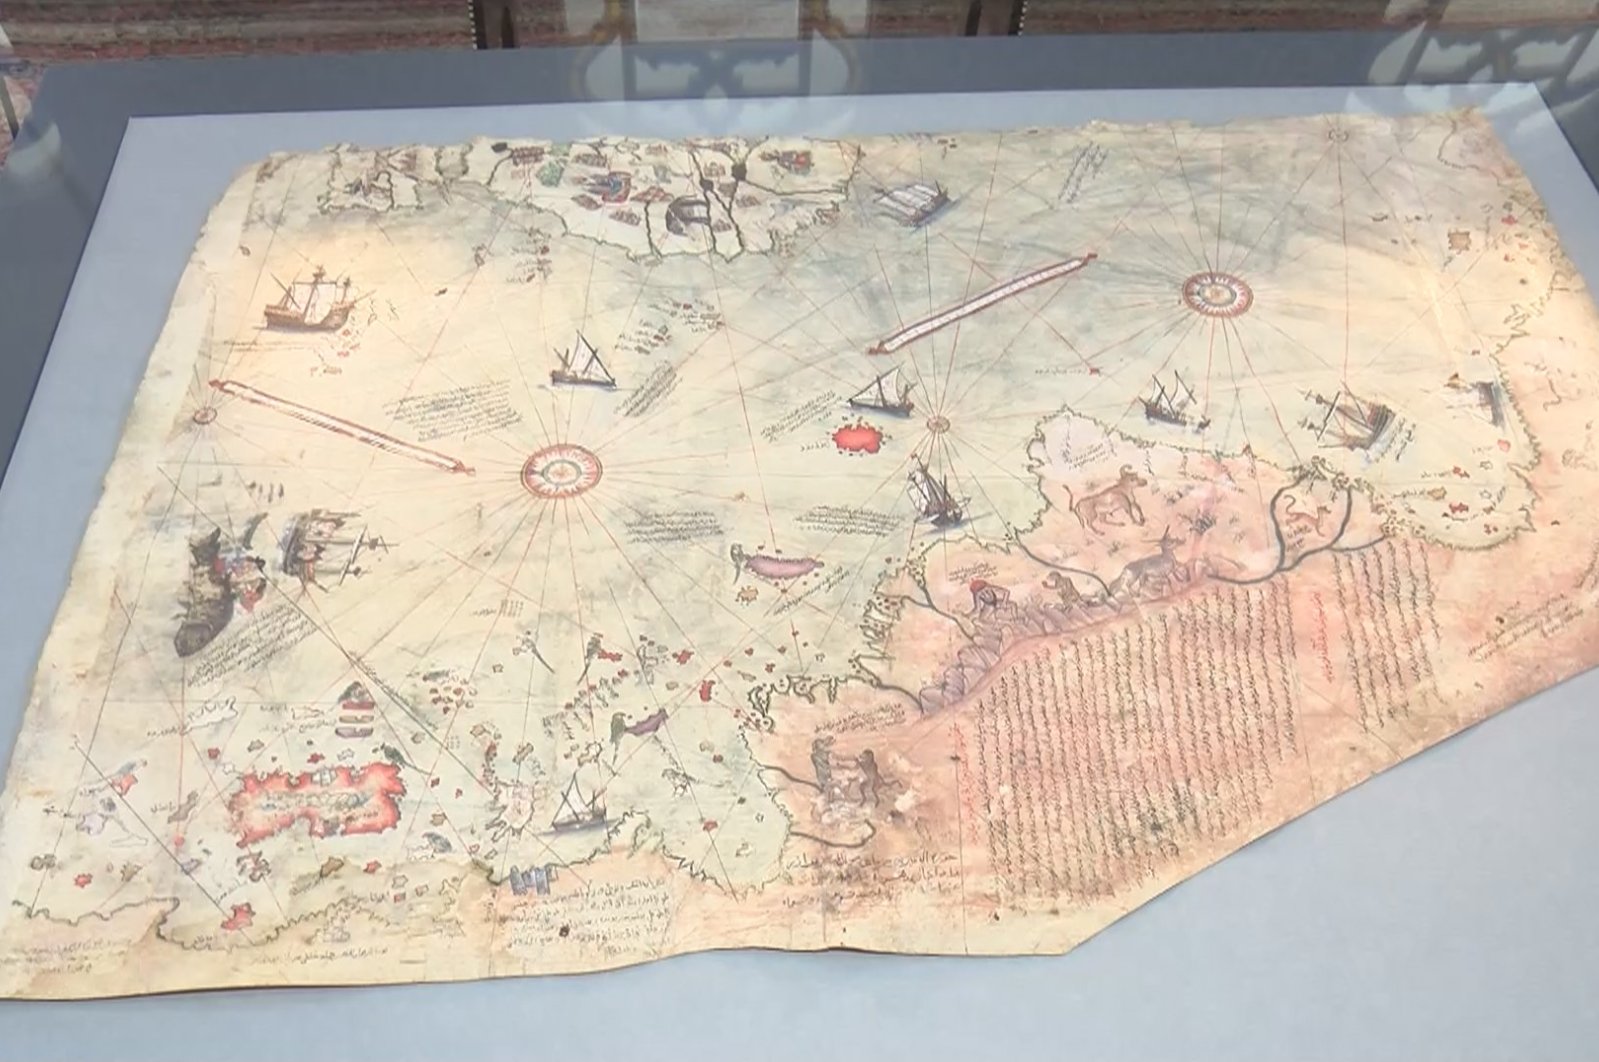 The famous 1513 map by Ottoman admiral Piri Reis is seen on display at the Topkapı Palace Museum in Istanbul, Nov. 18, 2021. (DHA Photo)